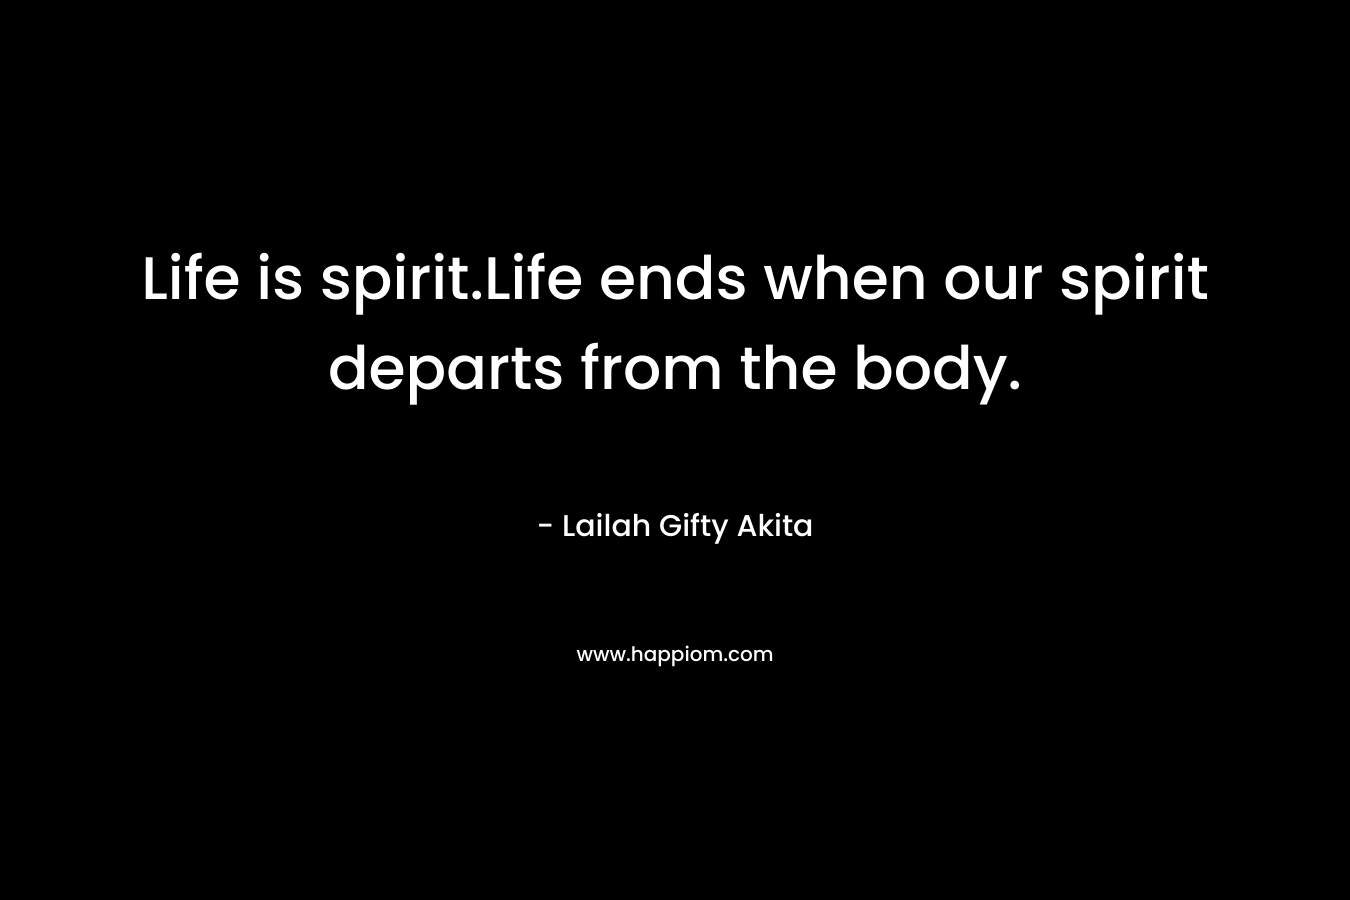 Life is spirit.Life ends when our spirit departs from the body.